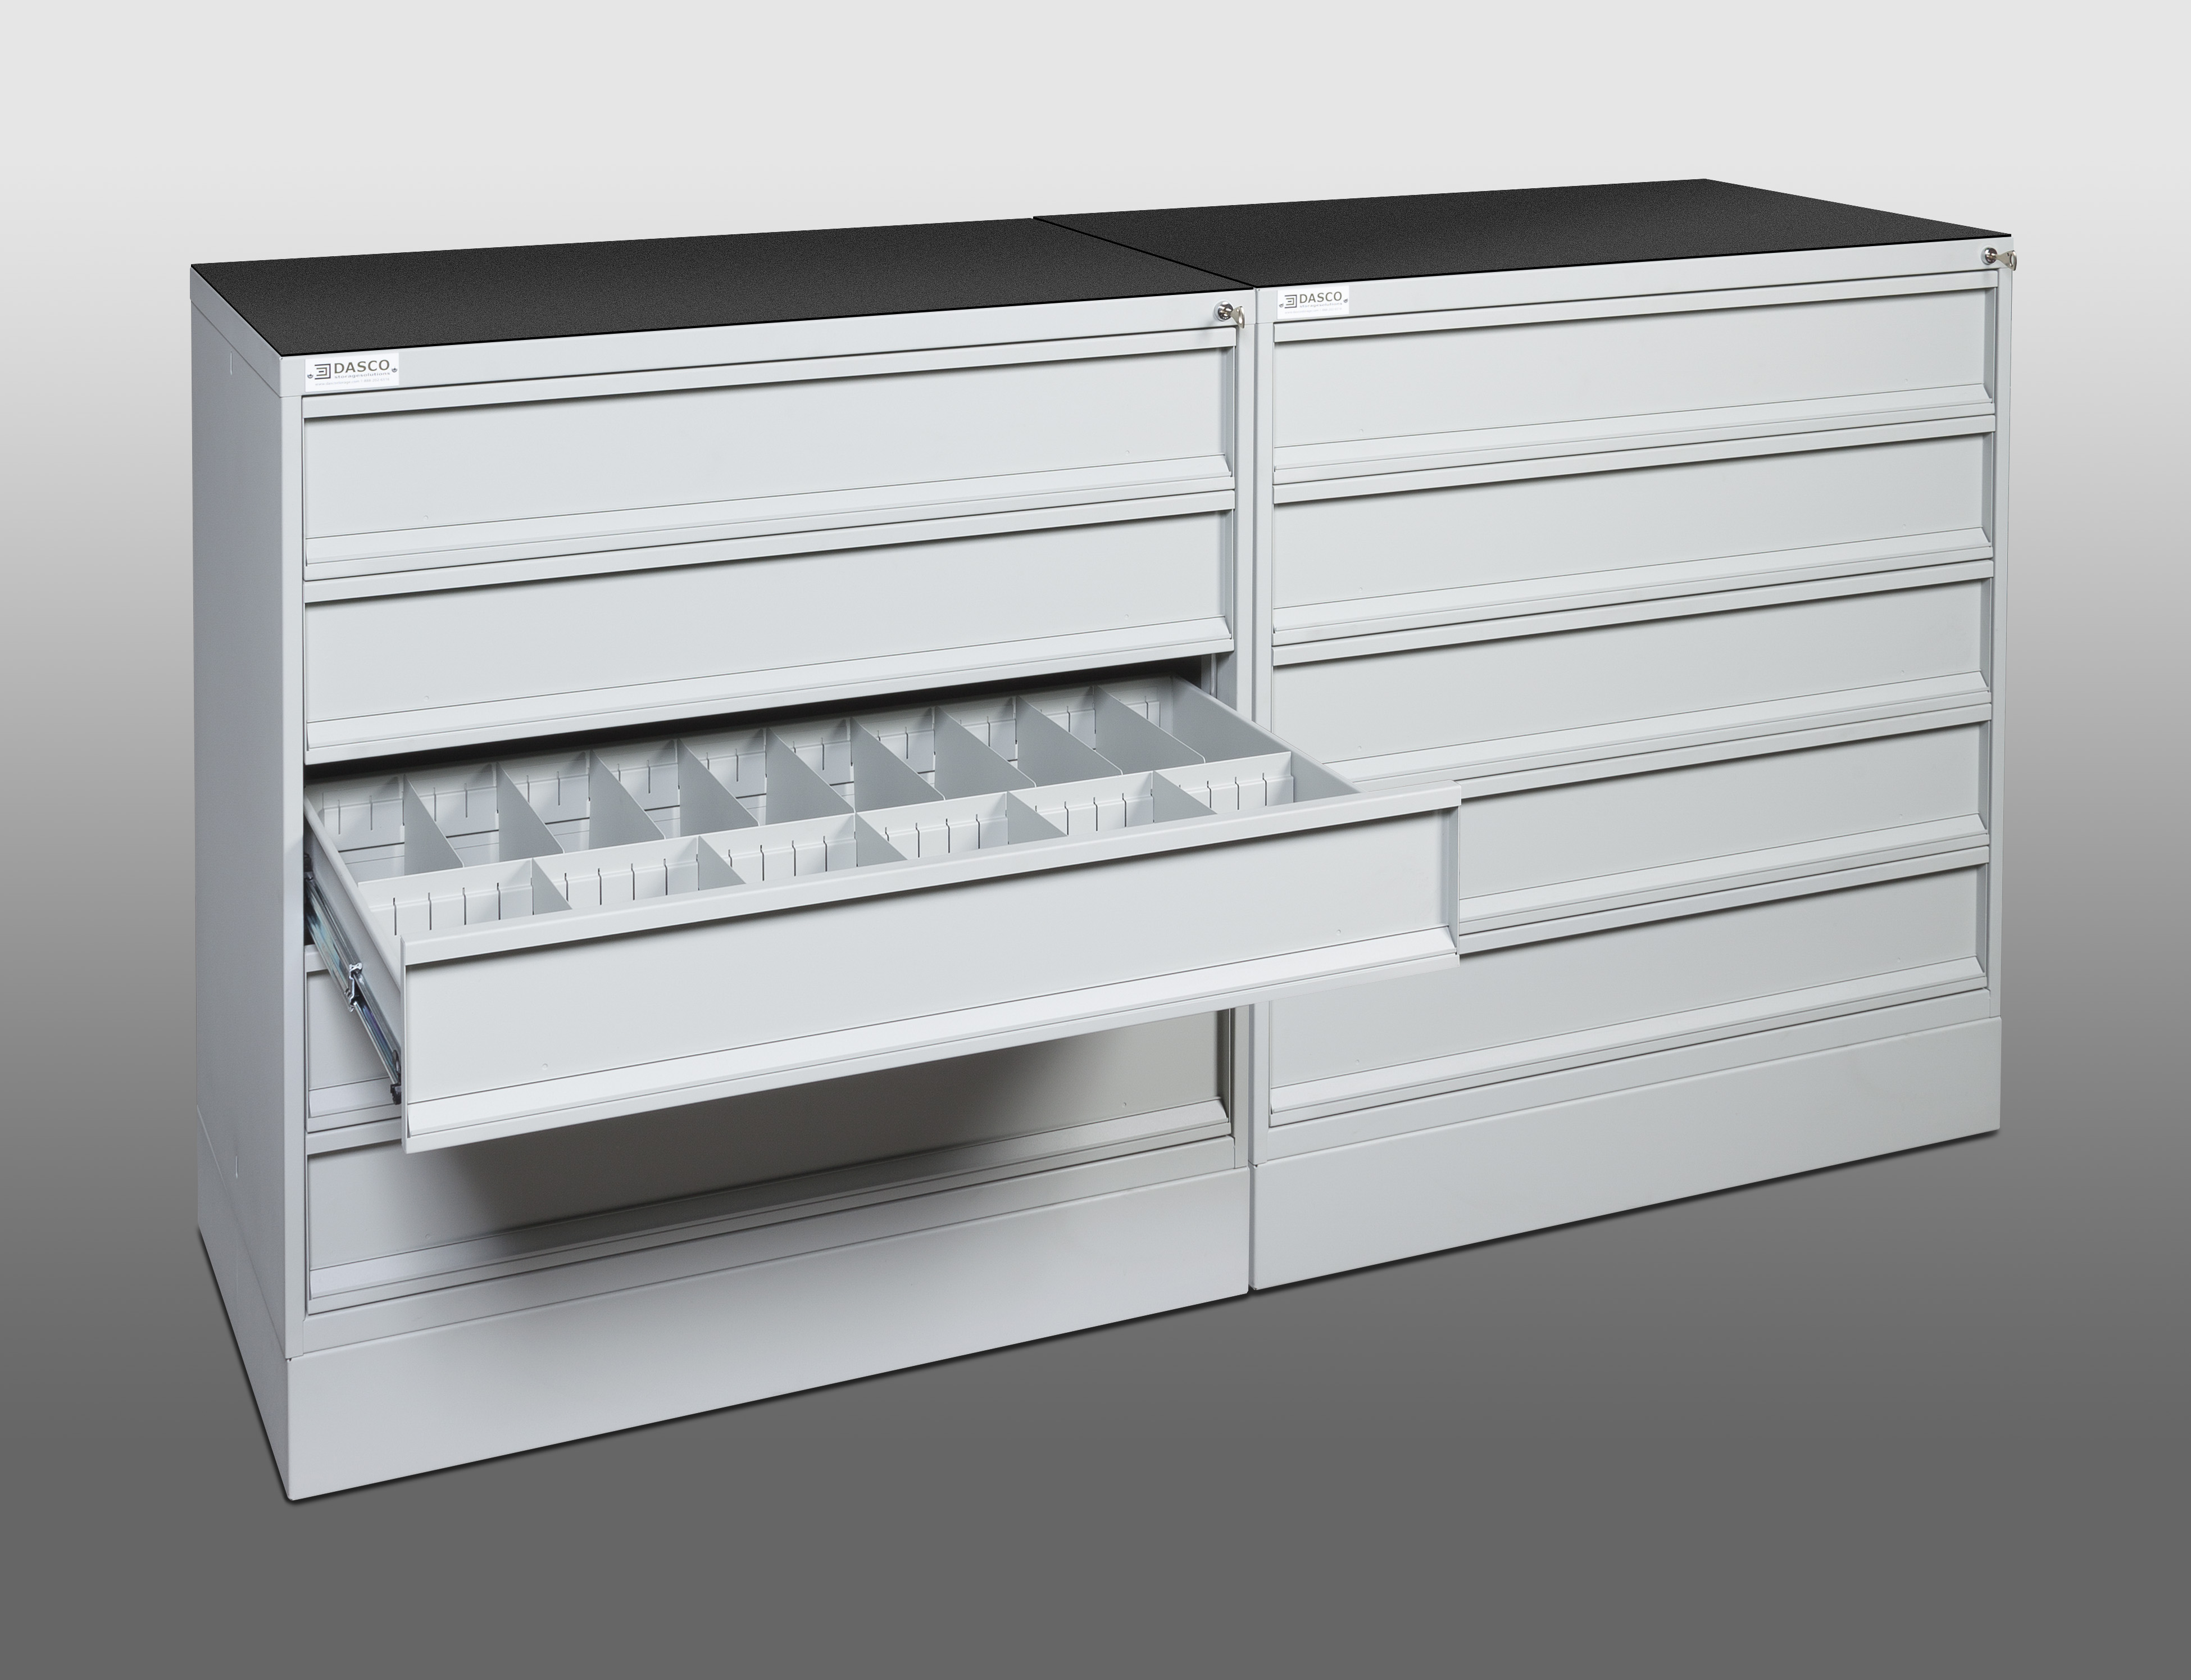 5-Drawer Pistol Cabinet Bank with Protective Matting For Top of Cabinet